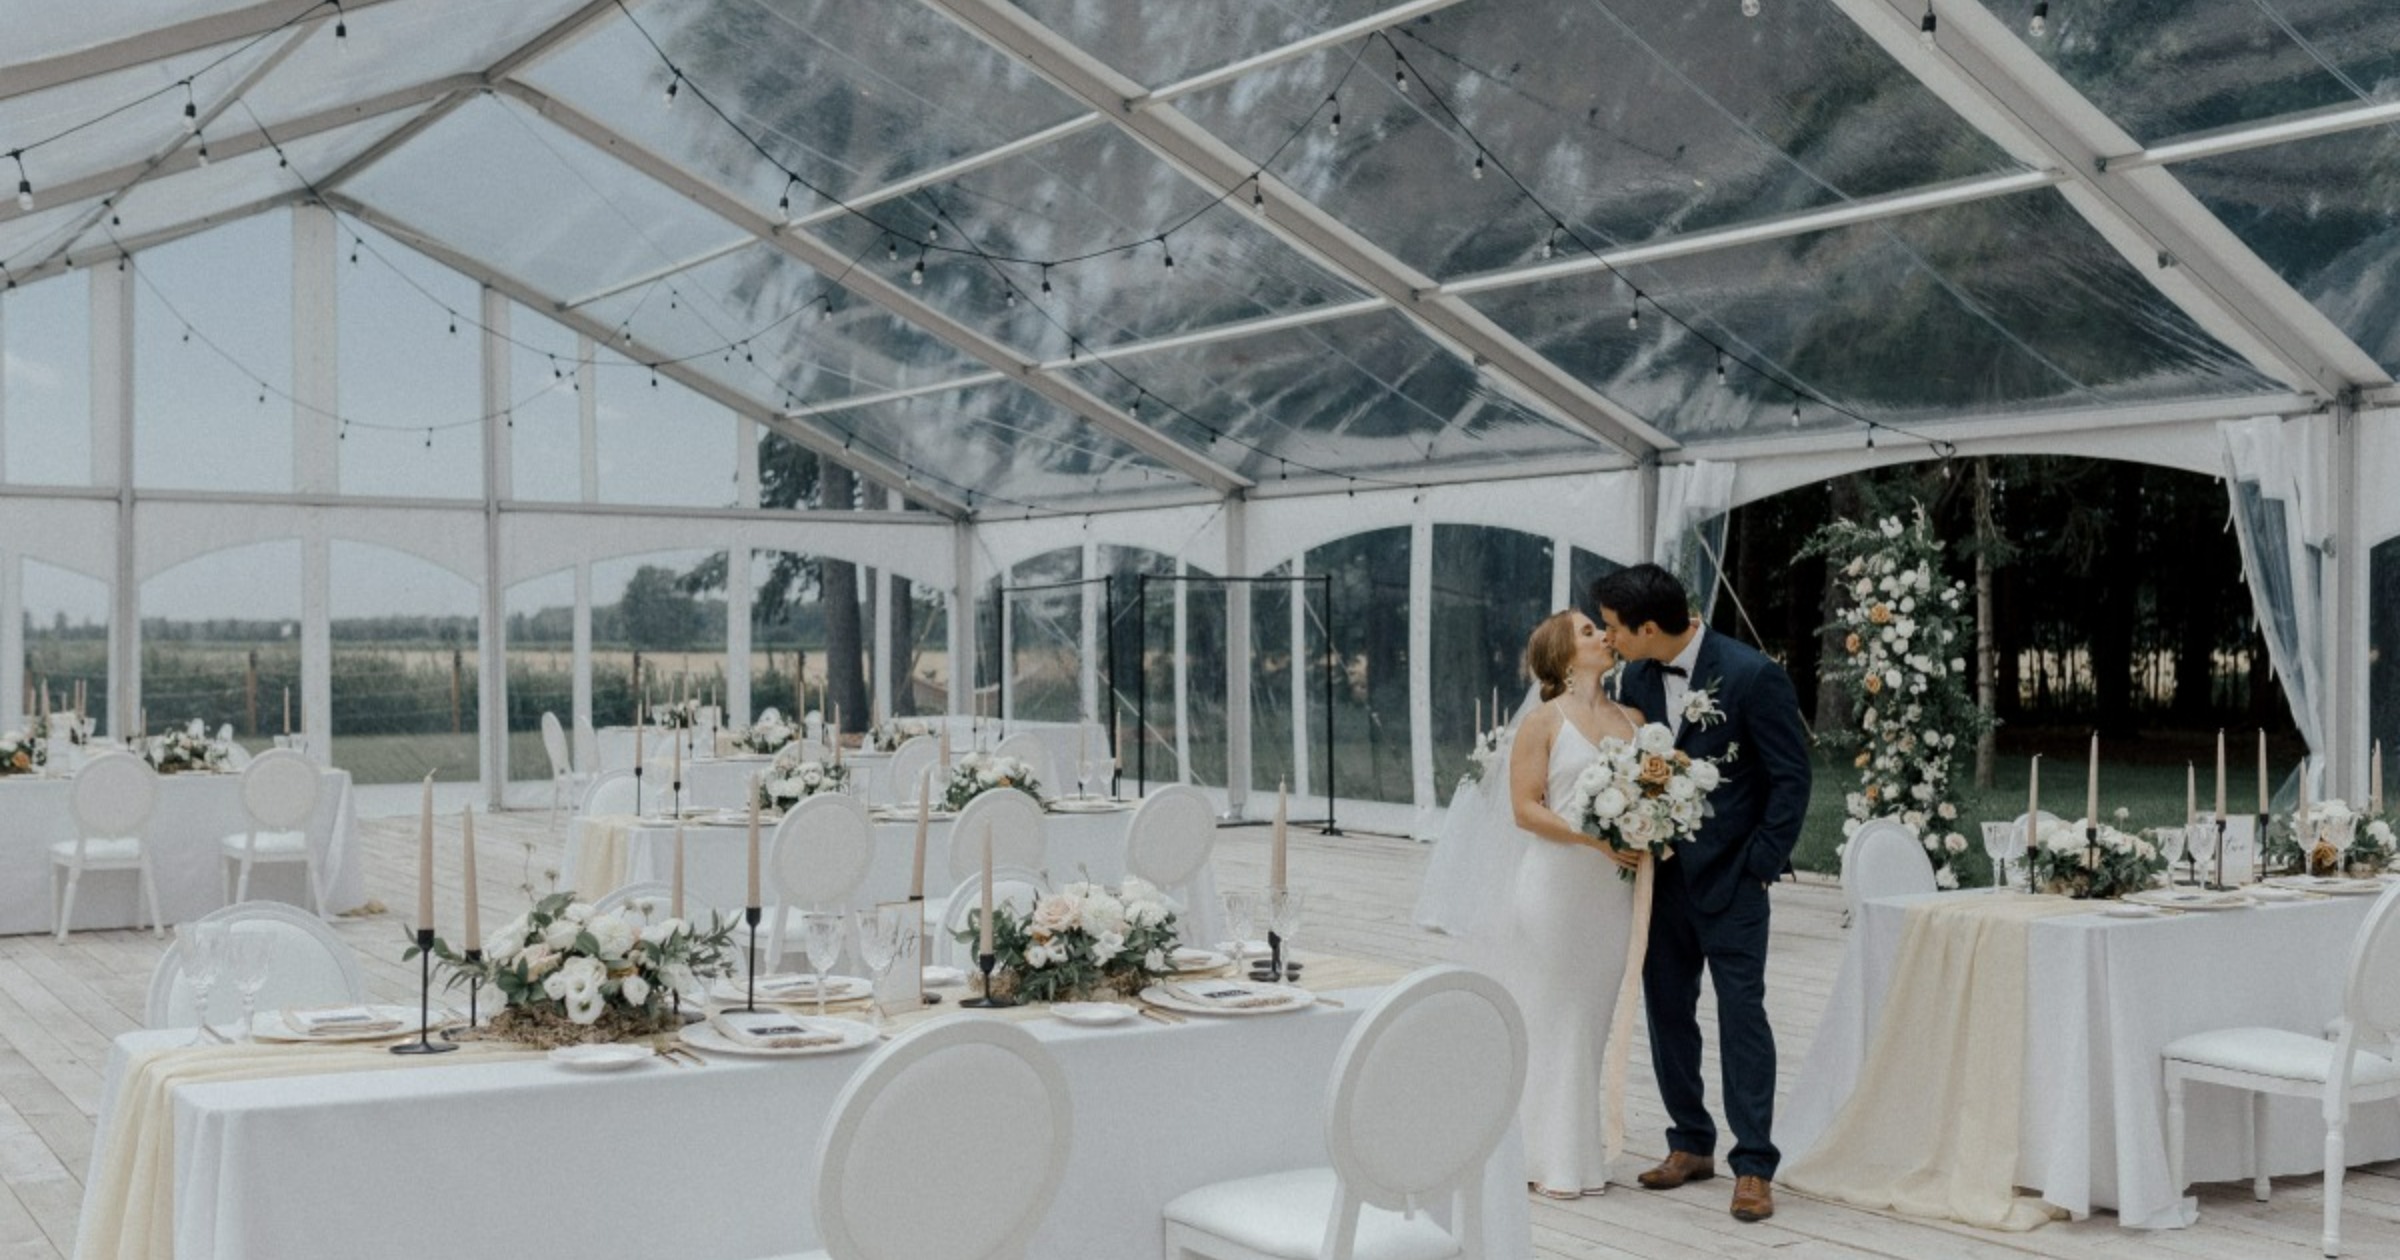 Rain Added to the Romance at this Wedding Under a Clear Tent